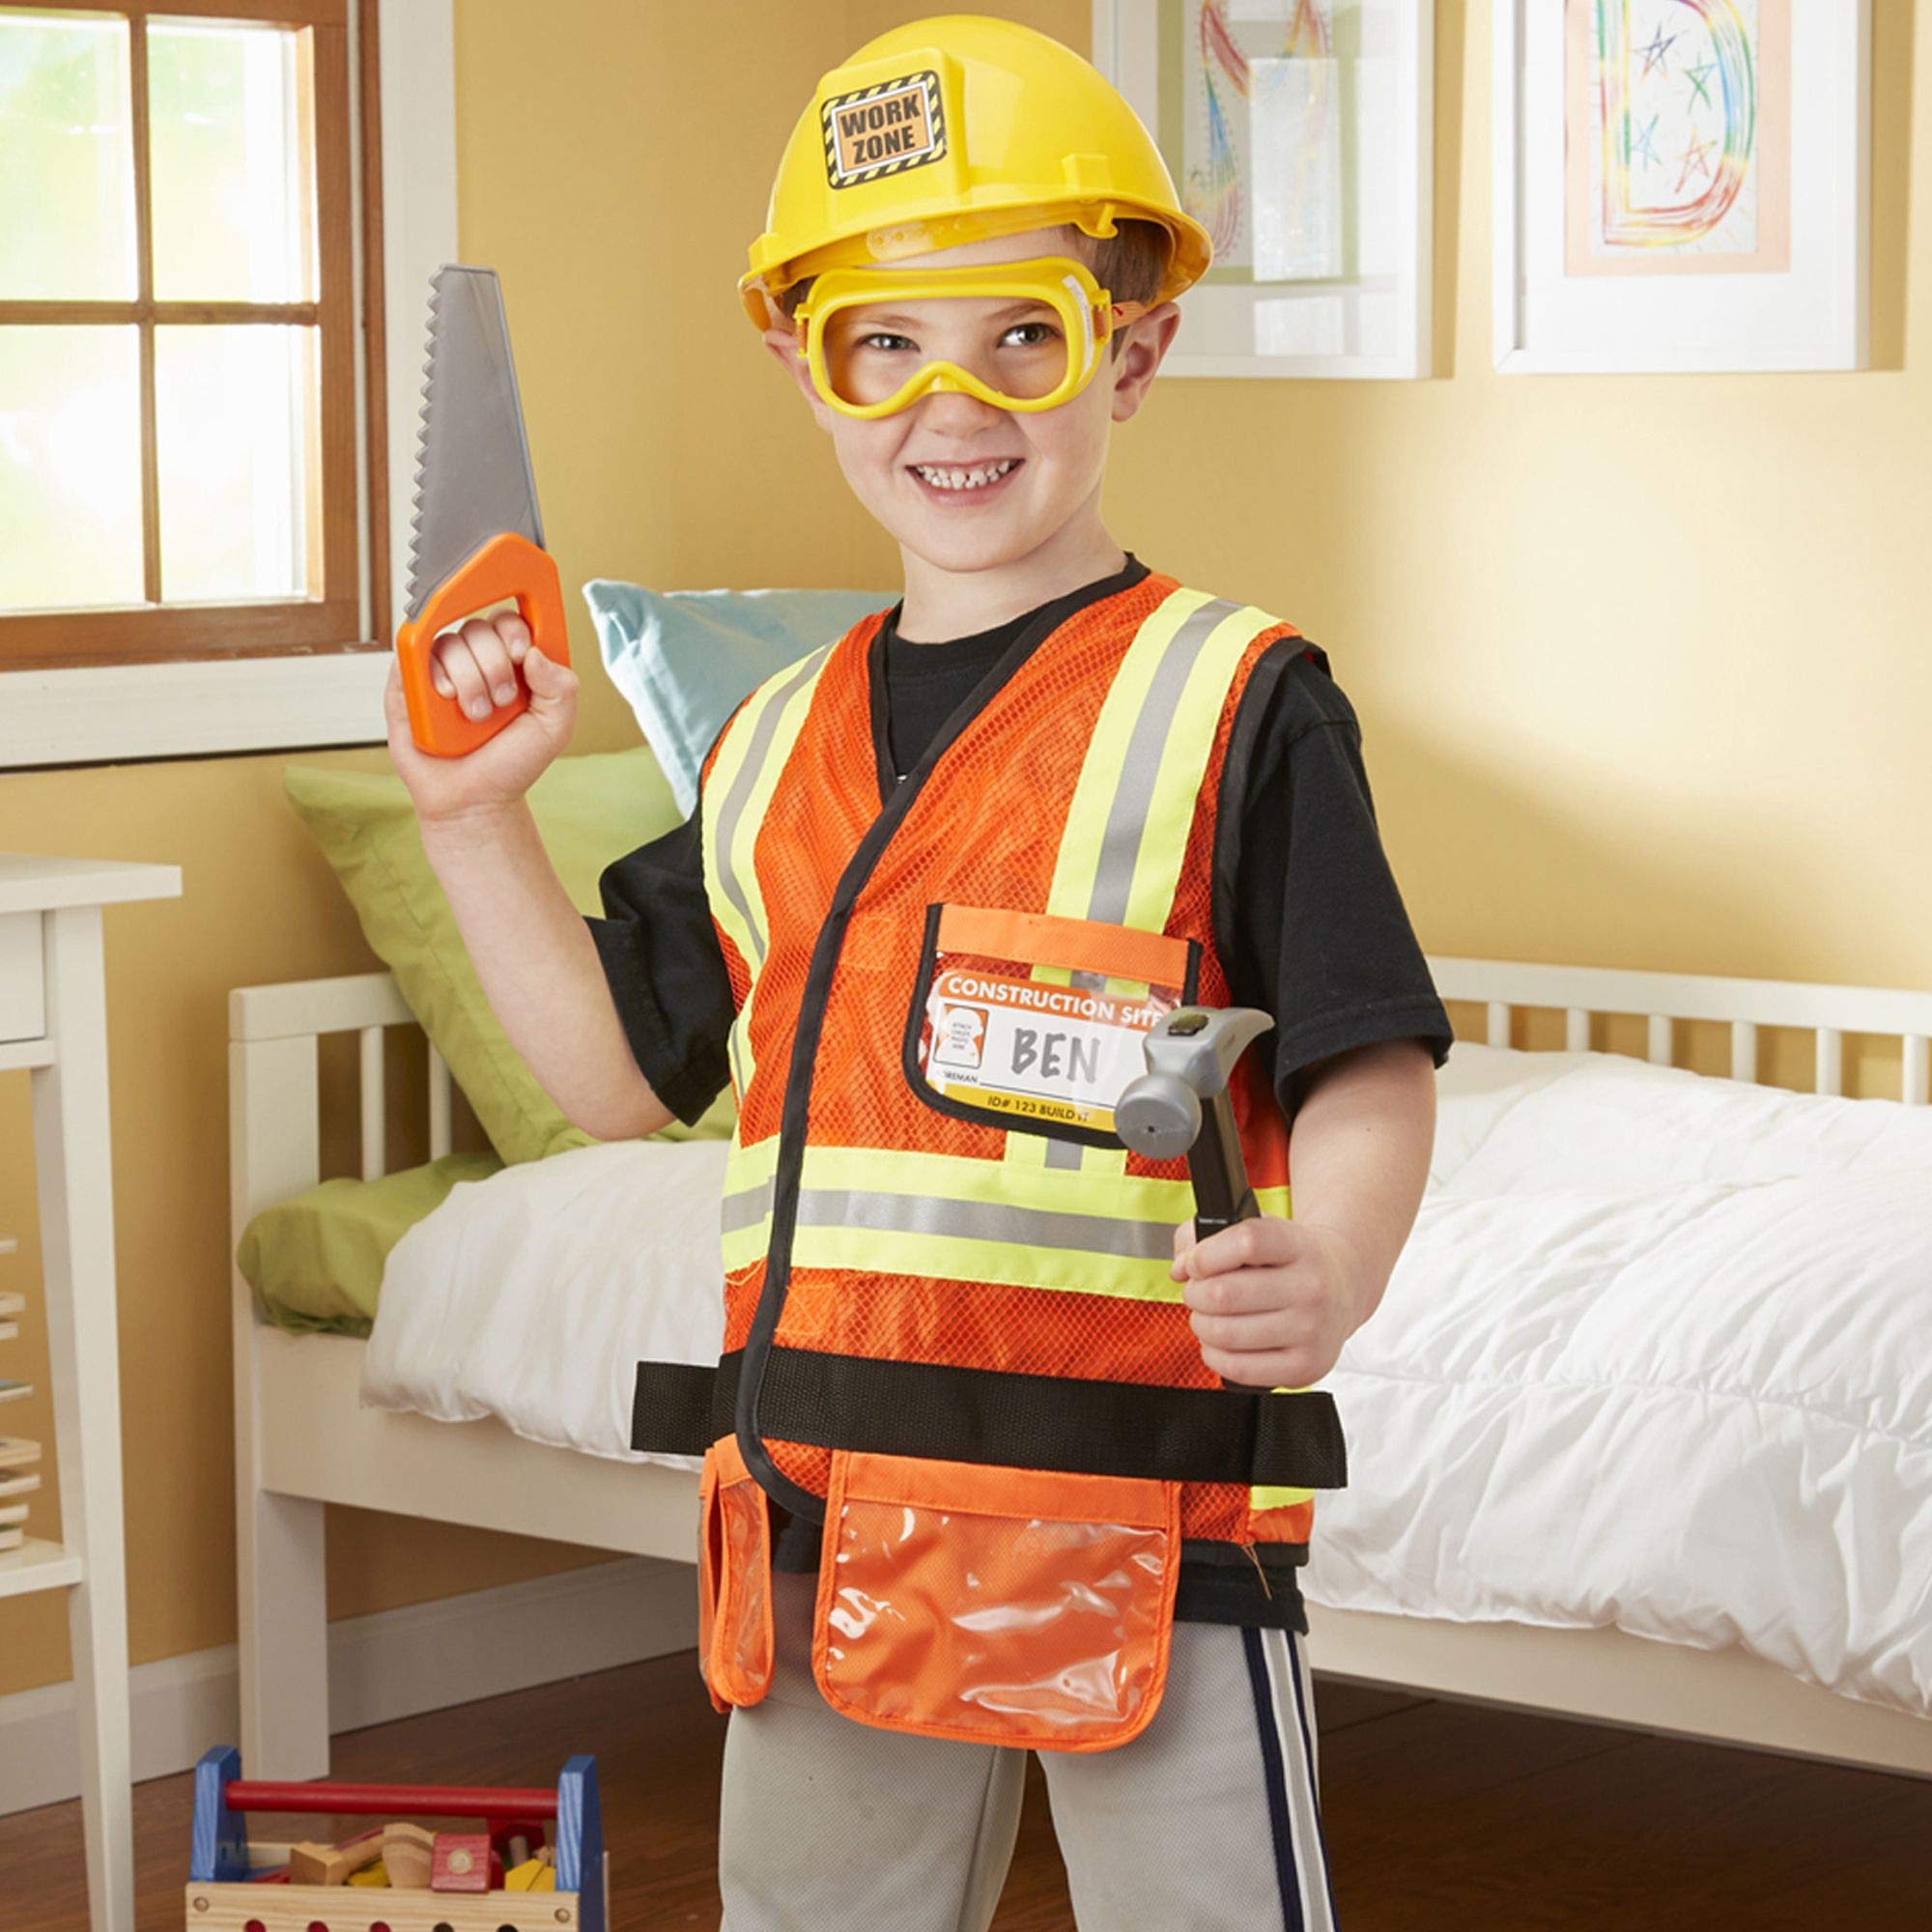 Melissa & Doug Role Play Costume Dress-Up Set (6 pcs) Frustration-Free Packaging - Pretend Construction Worker Outfit For Kids, Toddlers Ages 3+